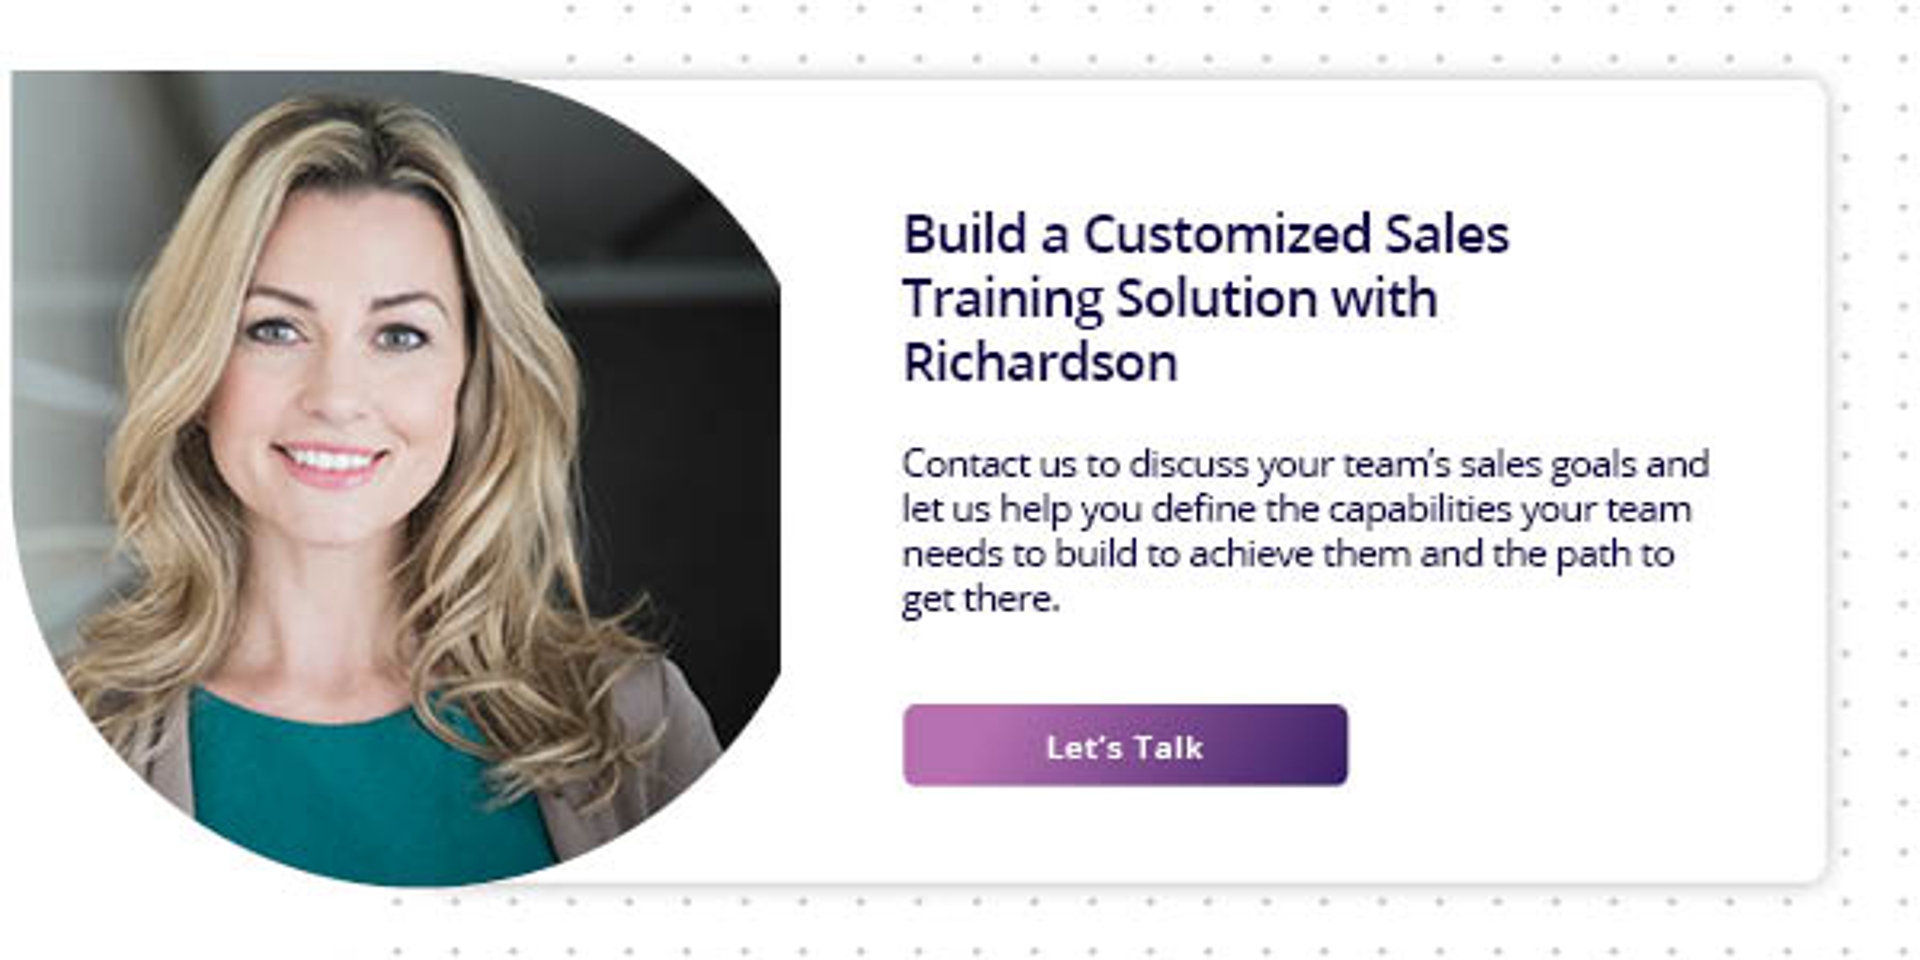 click here to contact richardson to talk about building a customized sales training solution